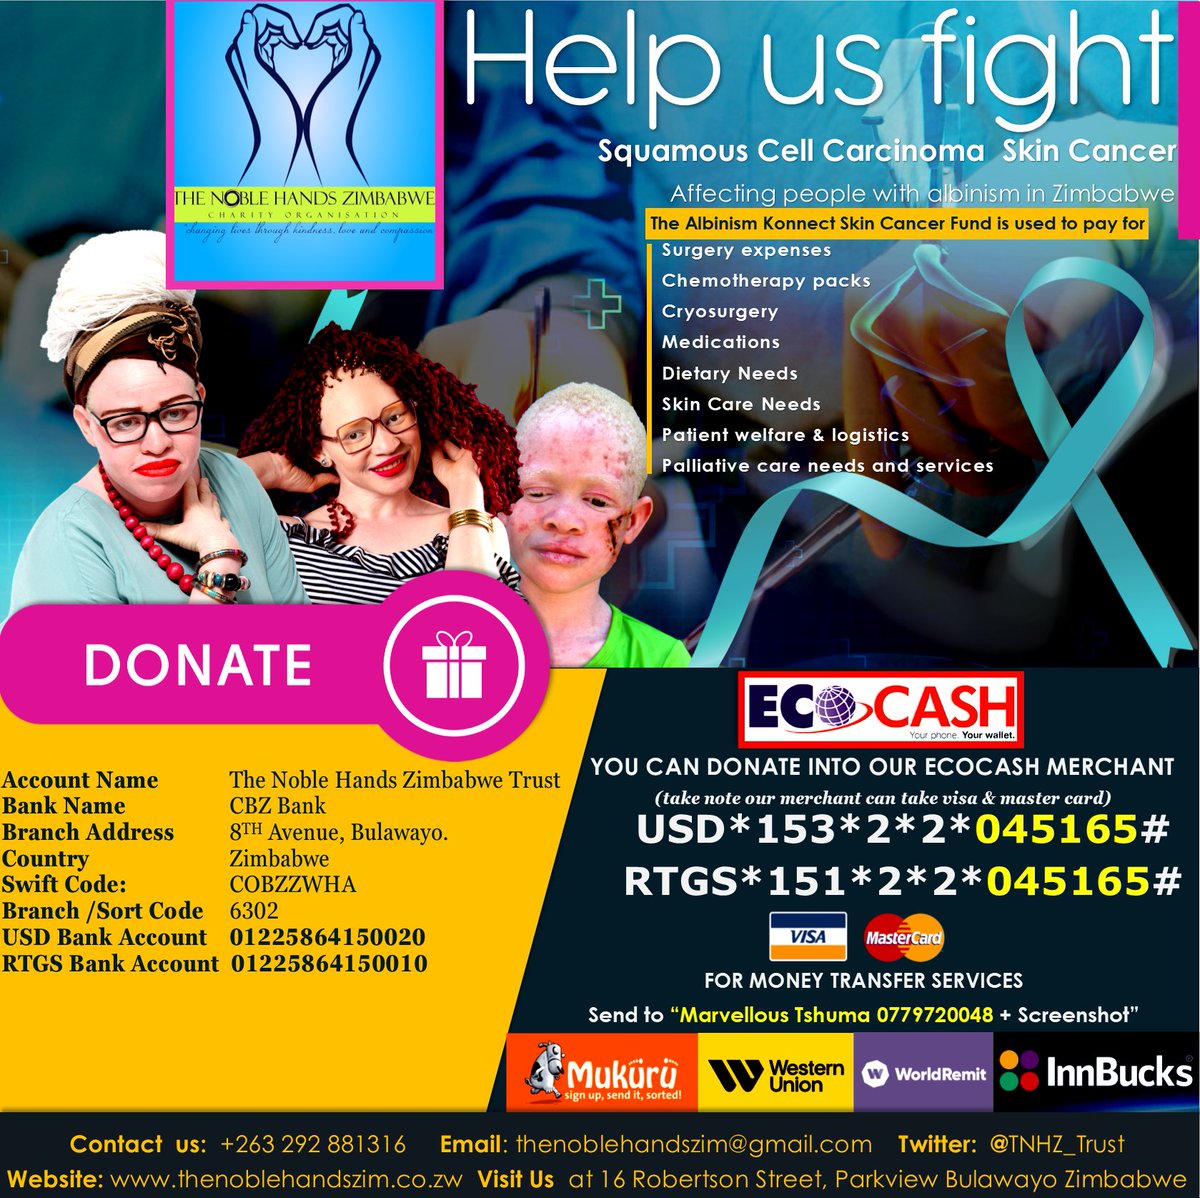 Did you know the Albinism Konnect Cancer Fund has impacted over 70 skin cancer patients since 2020. Let join hands and keep this fund going, no amount is too small indeed. Ndokumbirawo 100 Reposts chete a donor is definitely on your TL